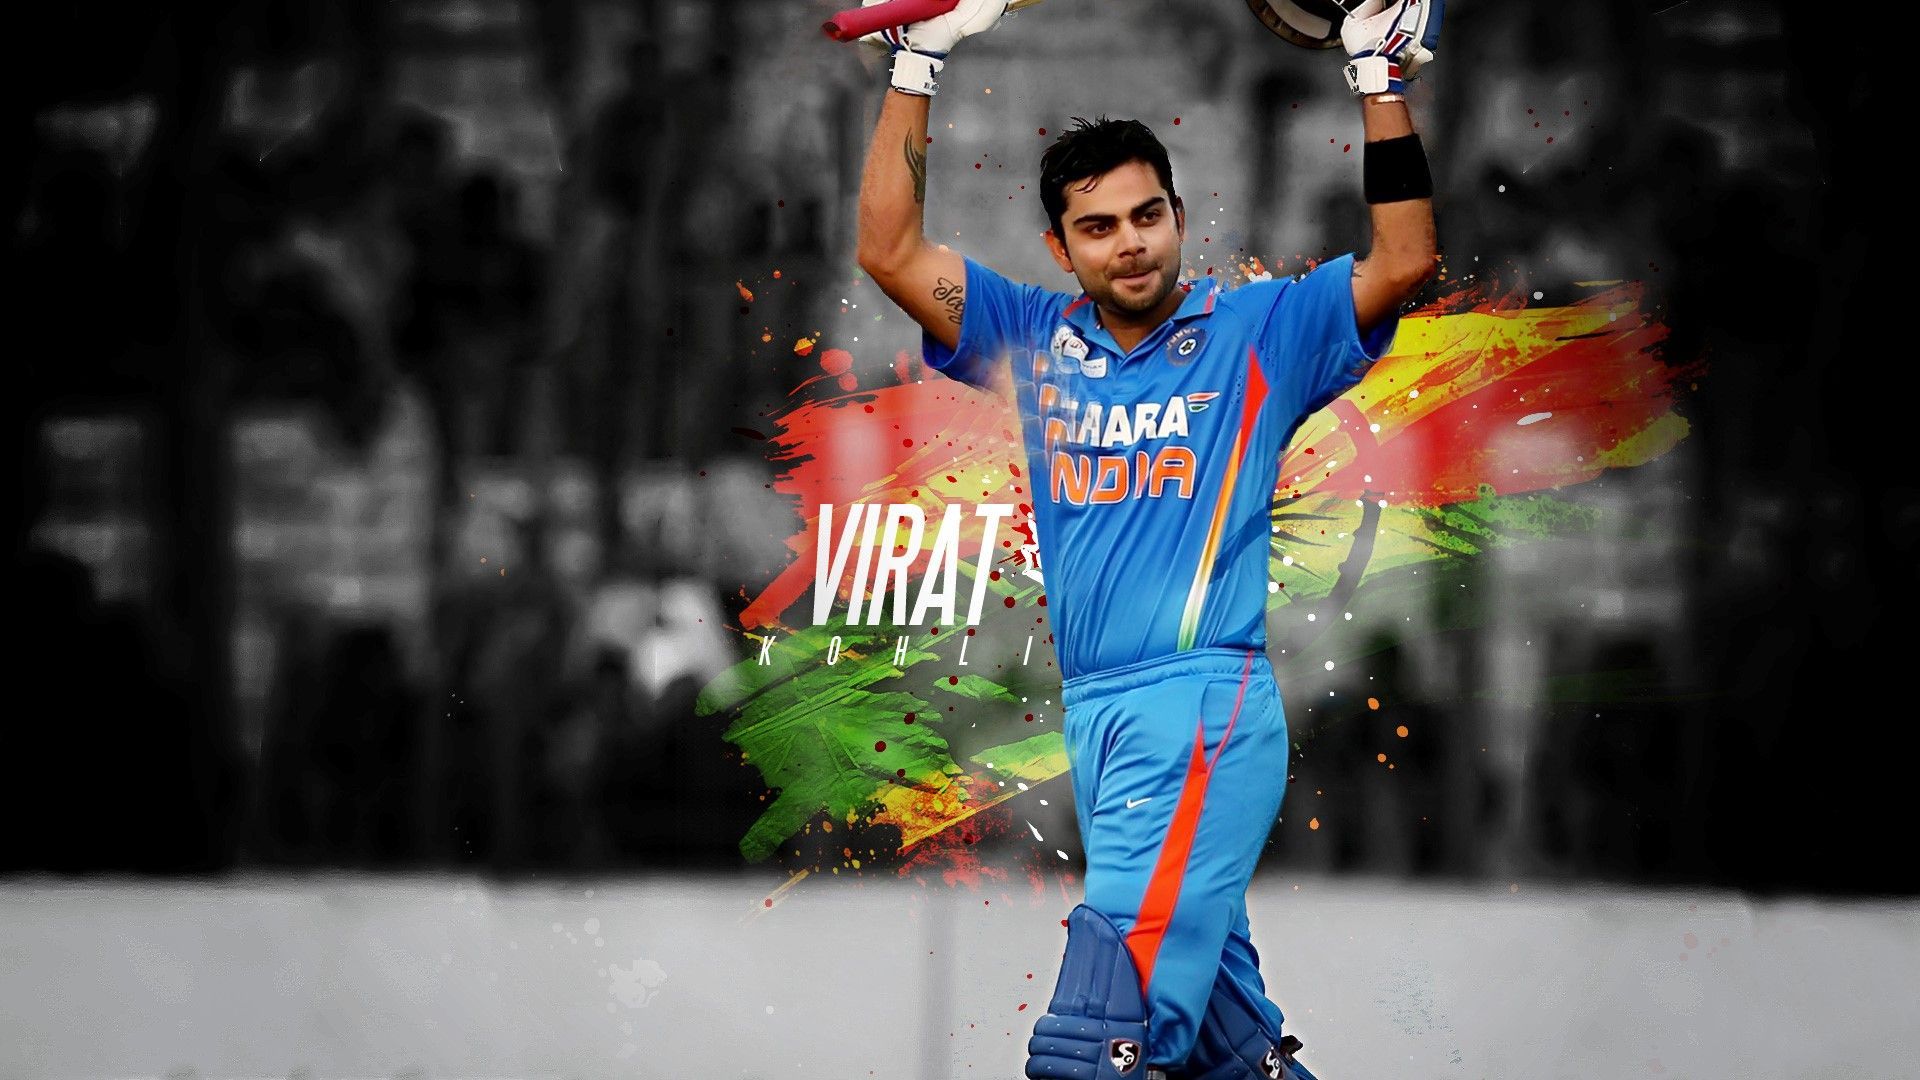 Cricket HD Wallpaper download latest Cricket HD Wallpaper for Computer, Mobile, iPhone, iPad or. Virat kohli wallpaper, Virat kohli, Cricket wallpaper